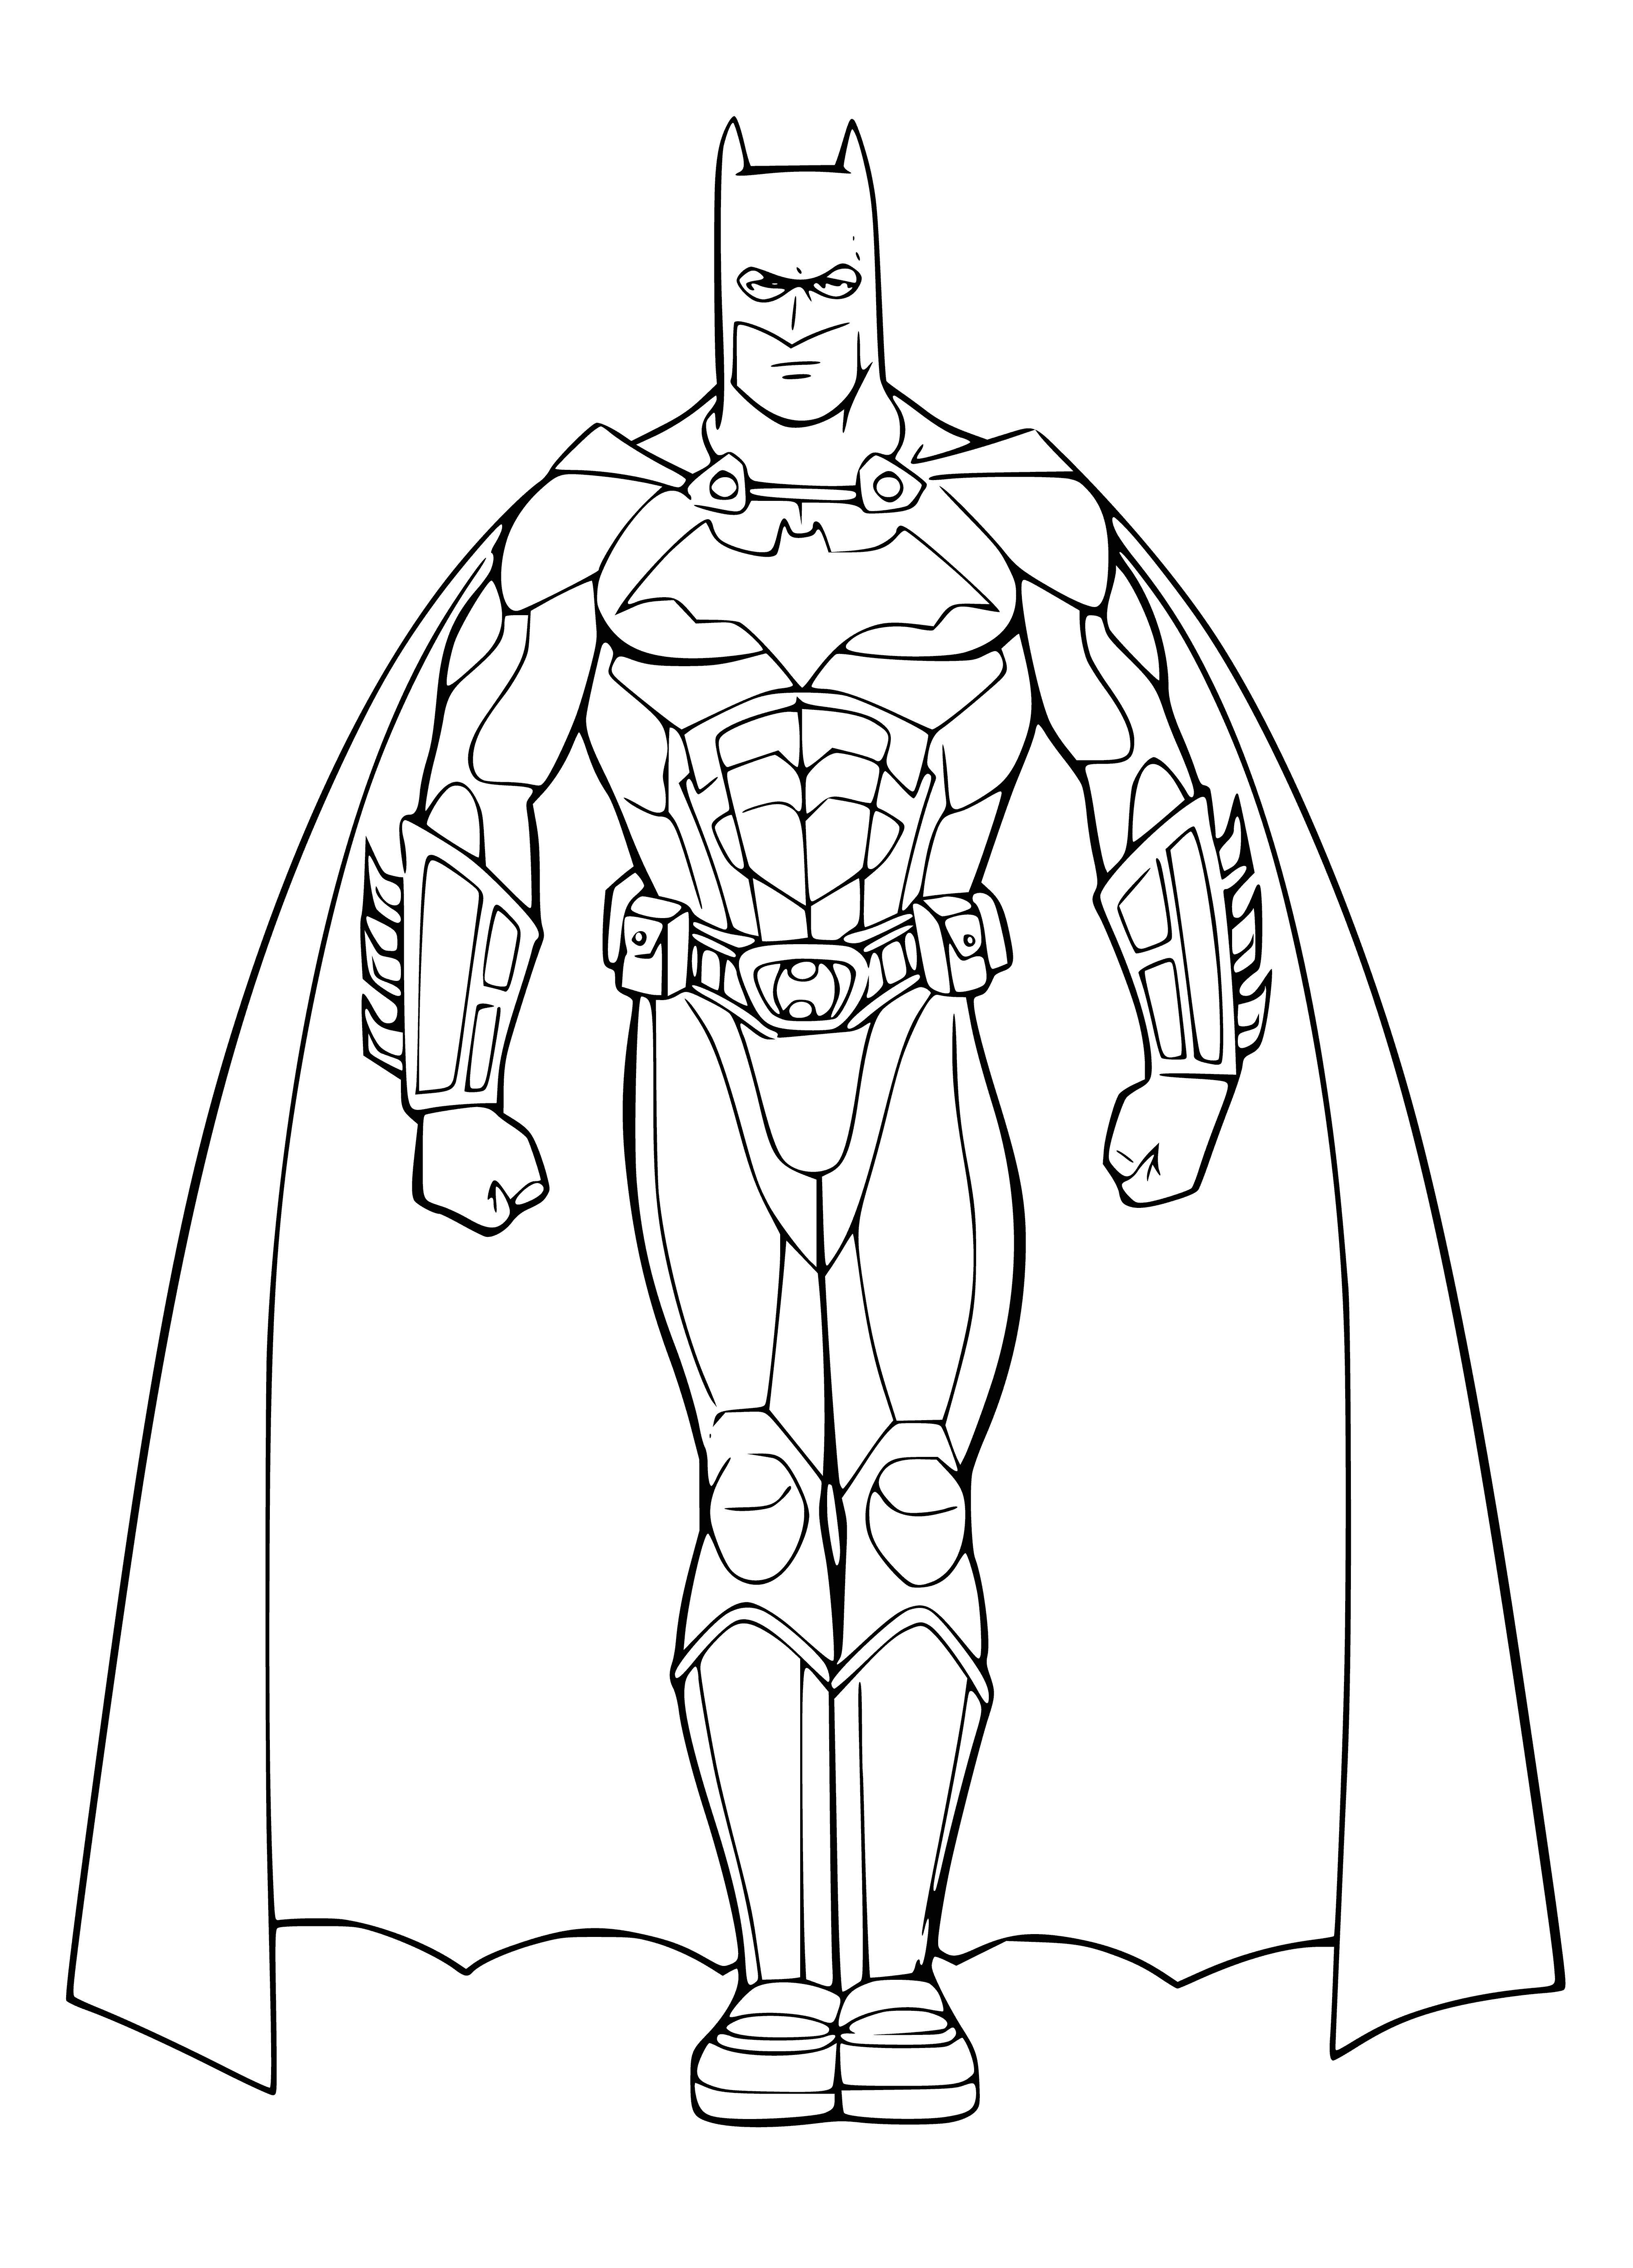 coloring page: A figure wearing a black cape and cowl with a yellow and black bat symbol, holding a black batarang, stands in a cityscape with tall buildings, a river and an open scream.